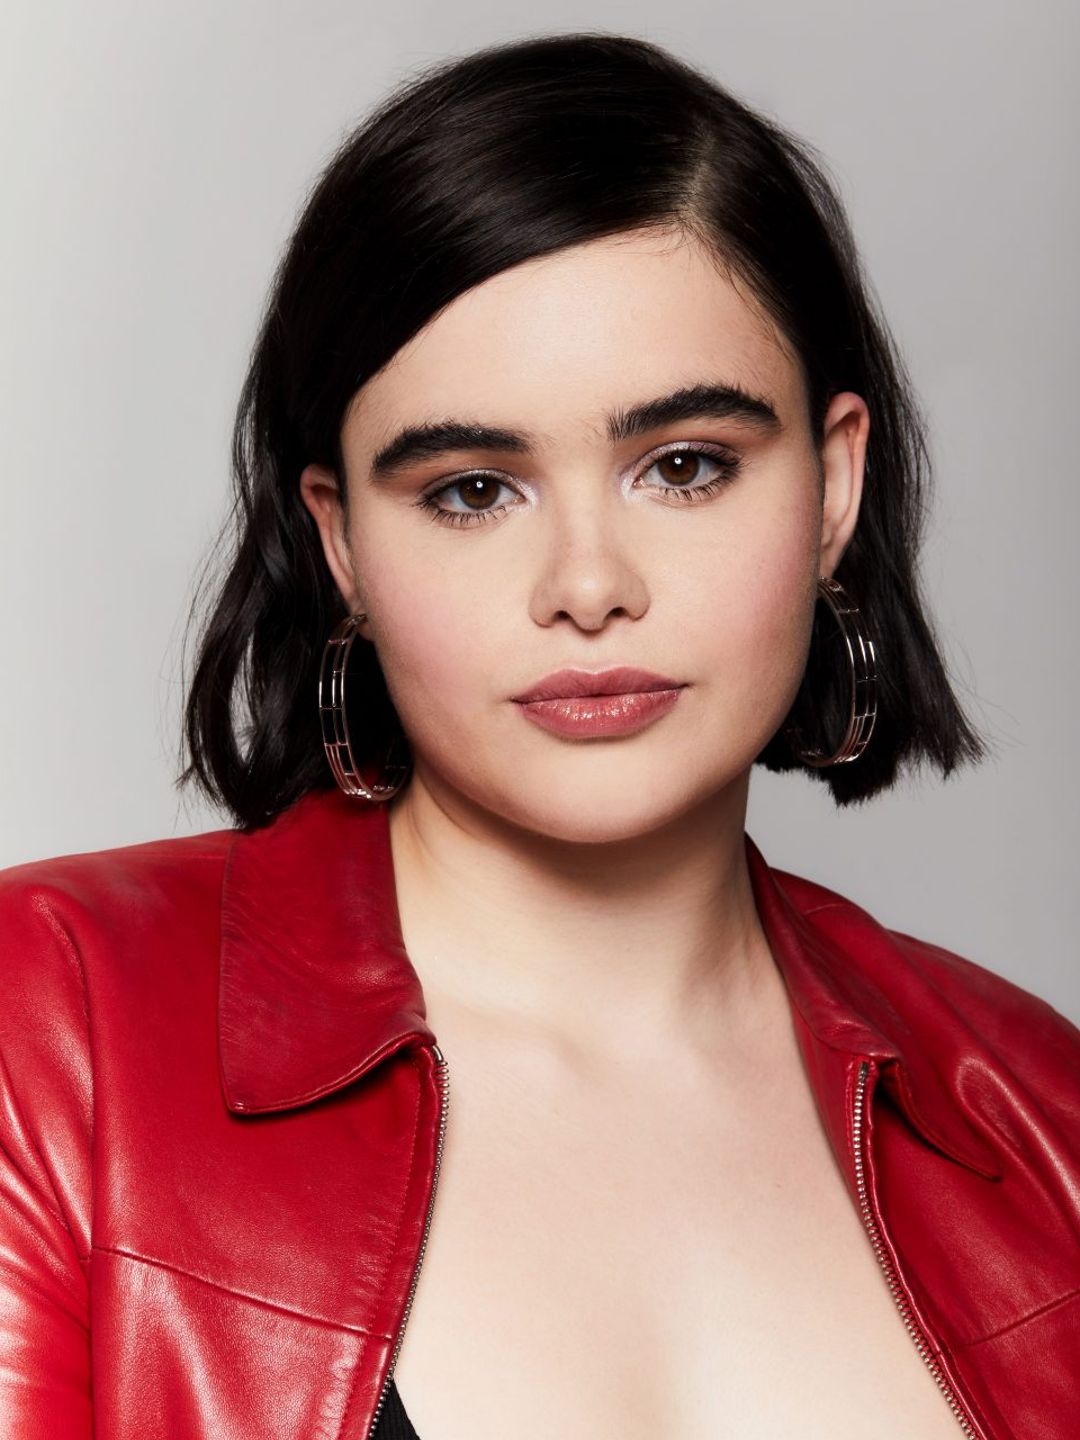 Barbie Ferreira who are her parents